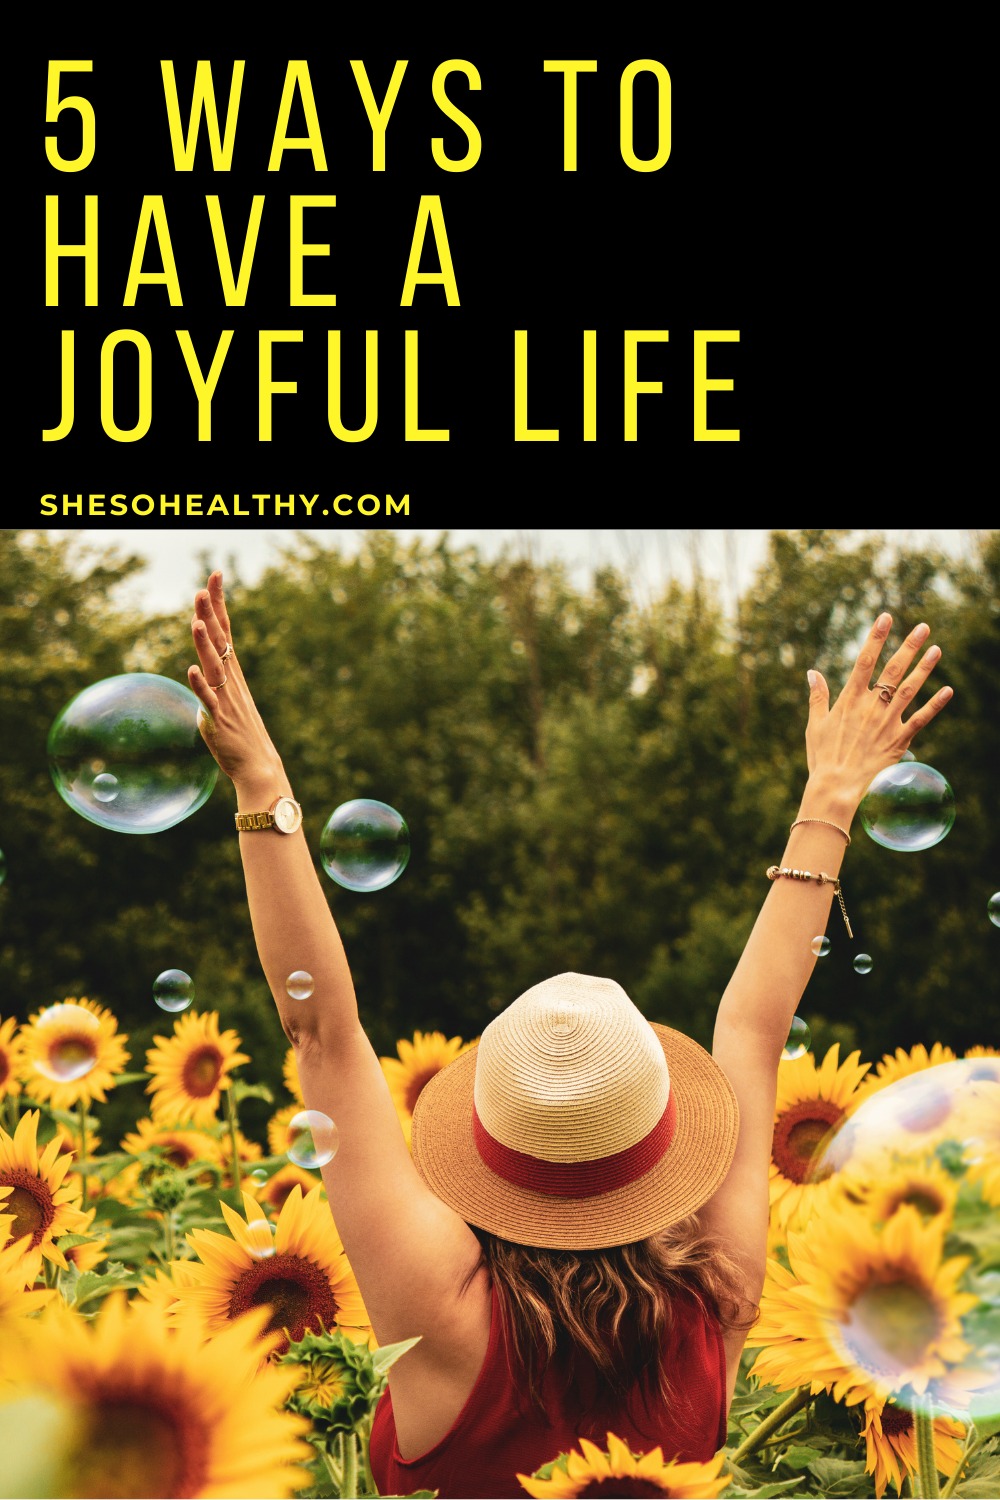 personal essay on what brings you joy in life